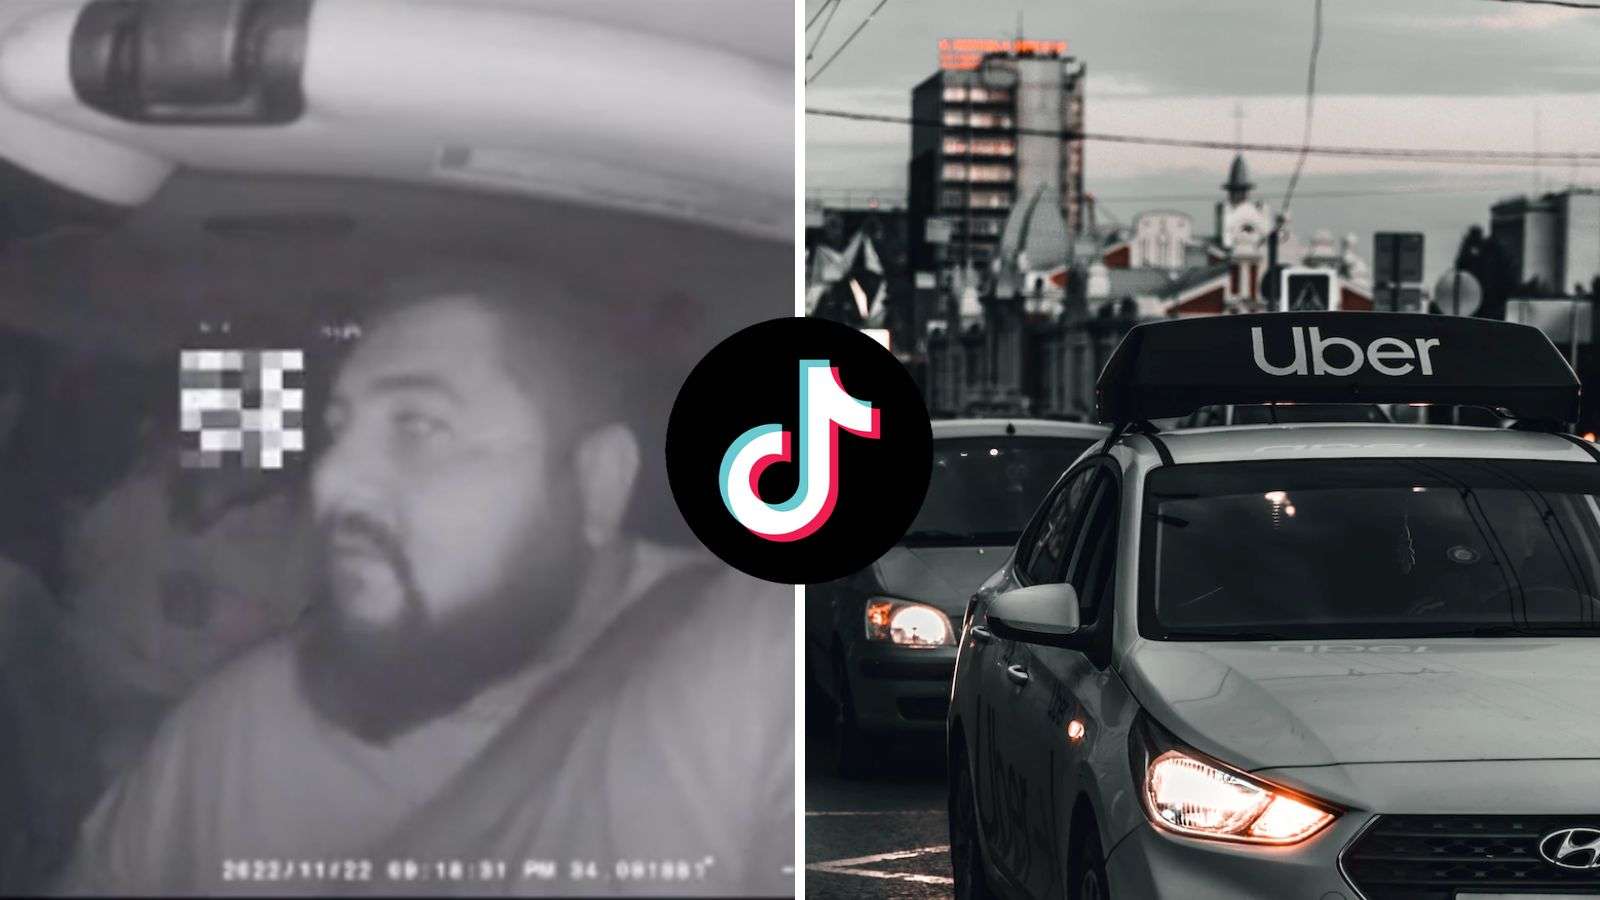 Woman gets kicked out of Uber after her boyfriend canceled trip mid-ride